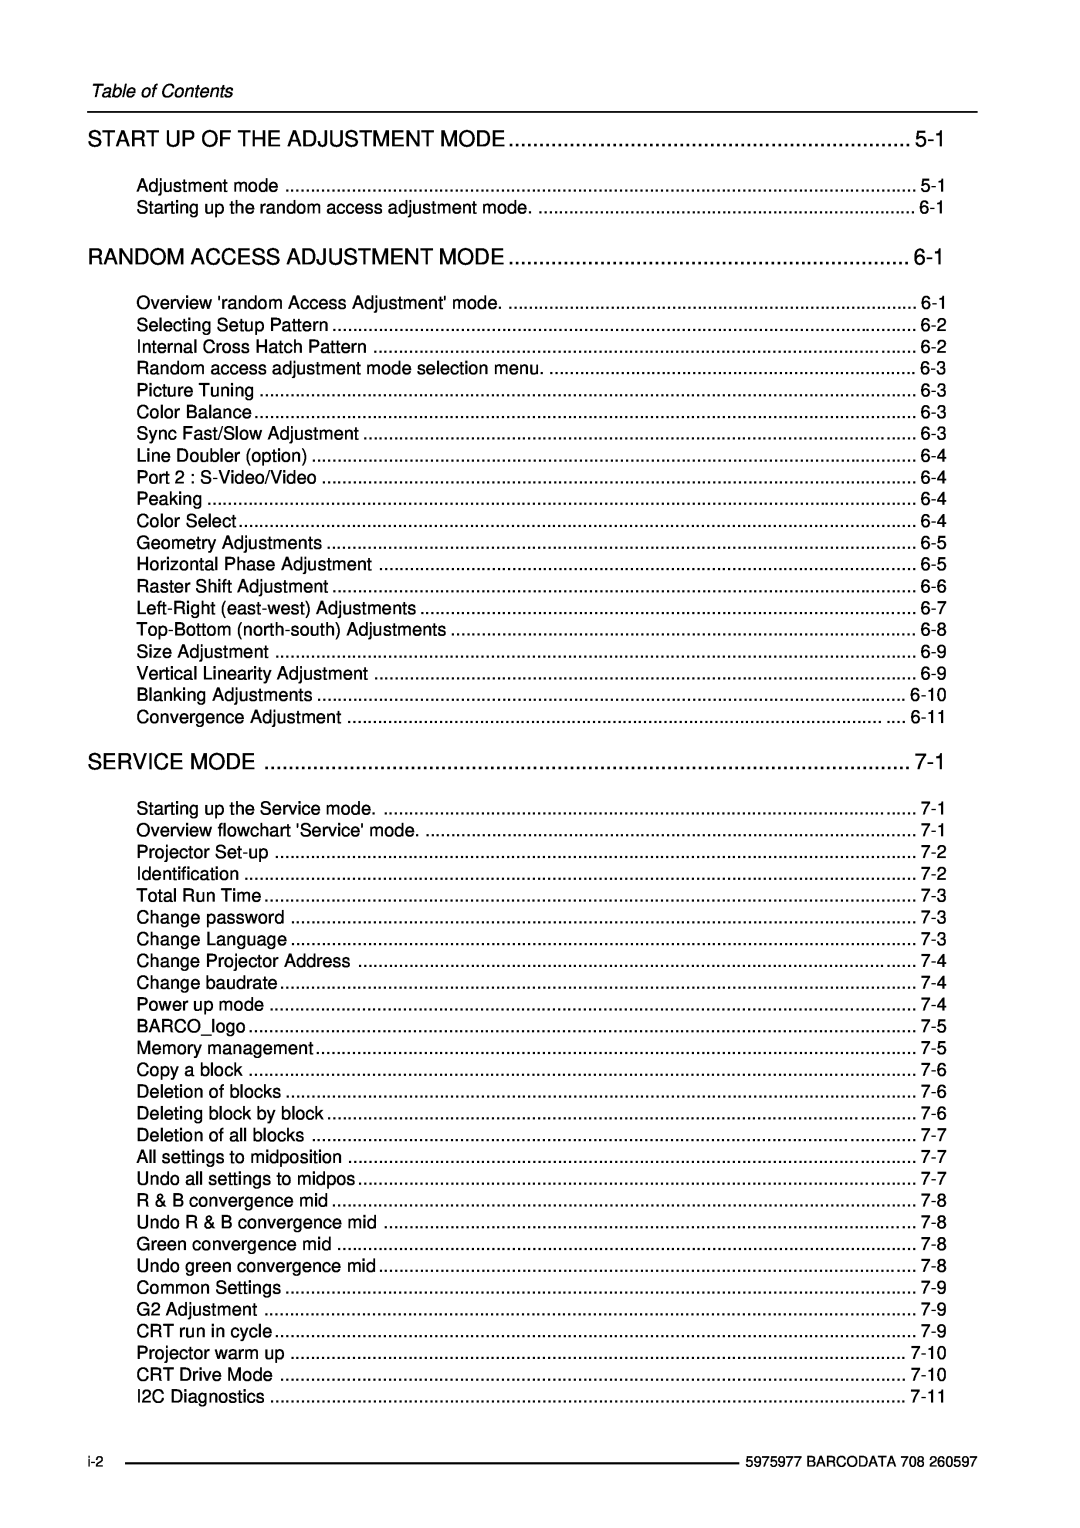 Barco R9002120 manual Start Up Of The Adjustment Mode, Random Access Adjustment Mode, Service Mode, Table of Contents 